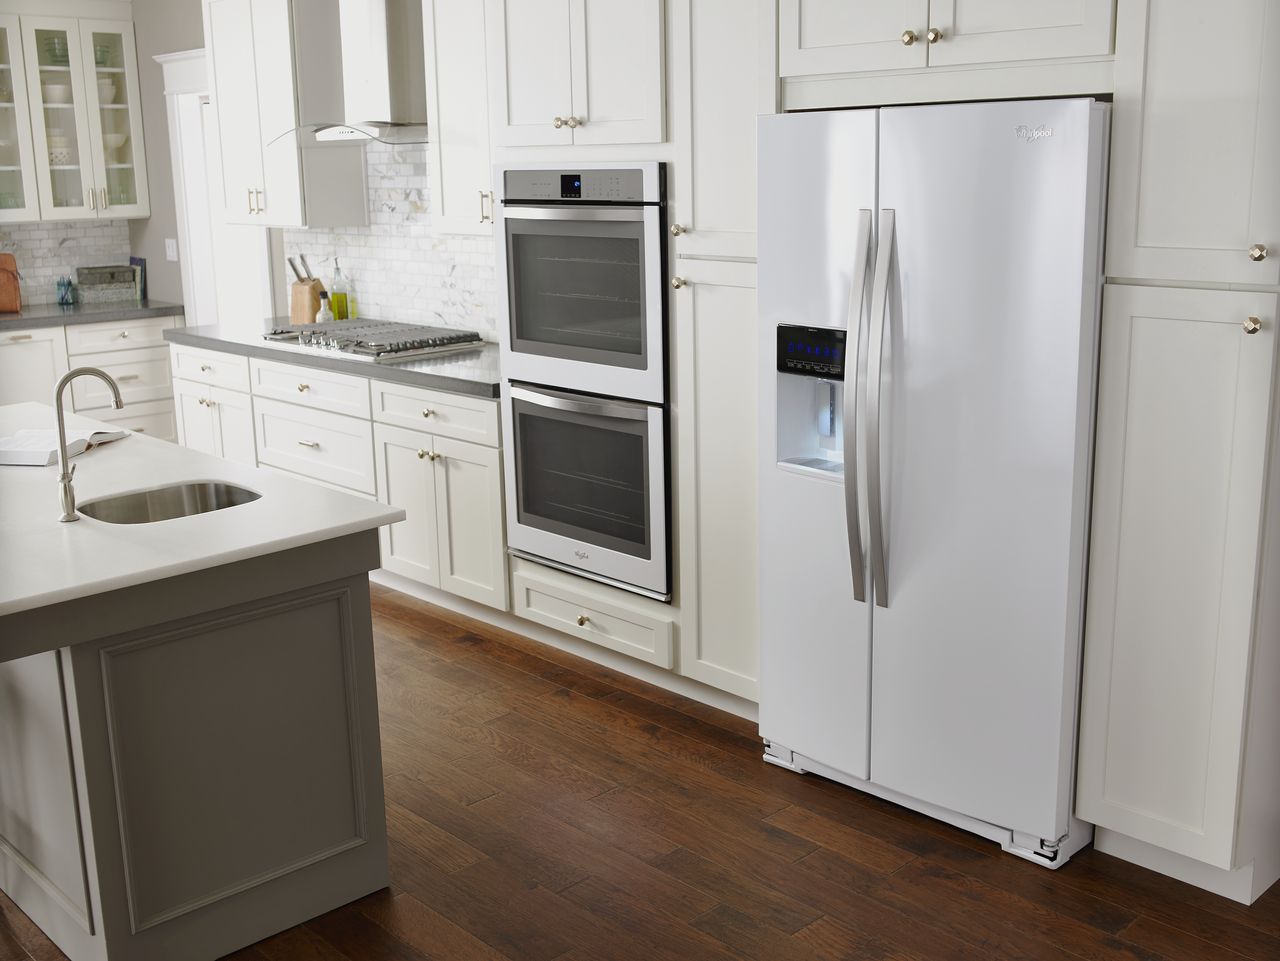 Different Fridge Configurations to Choose From